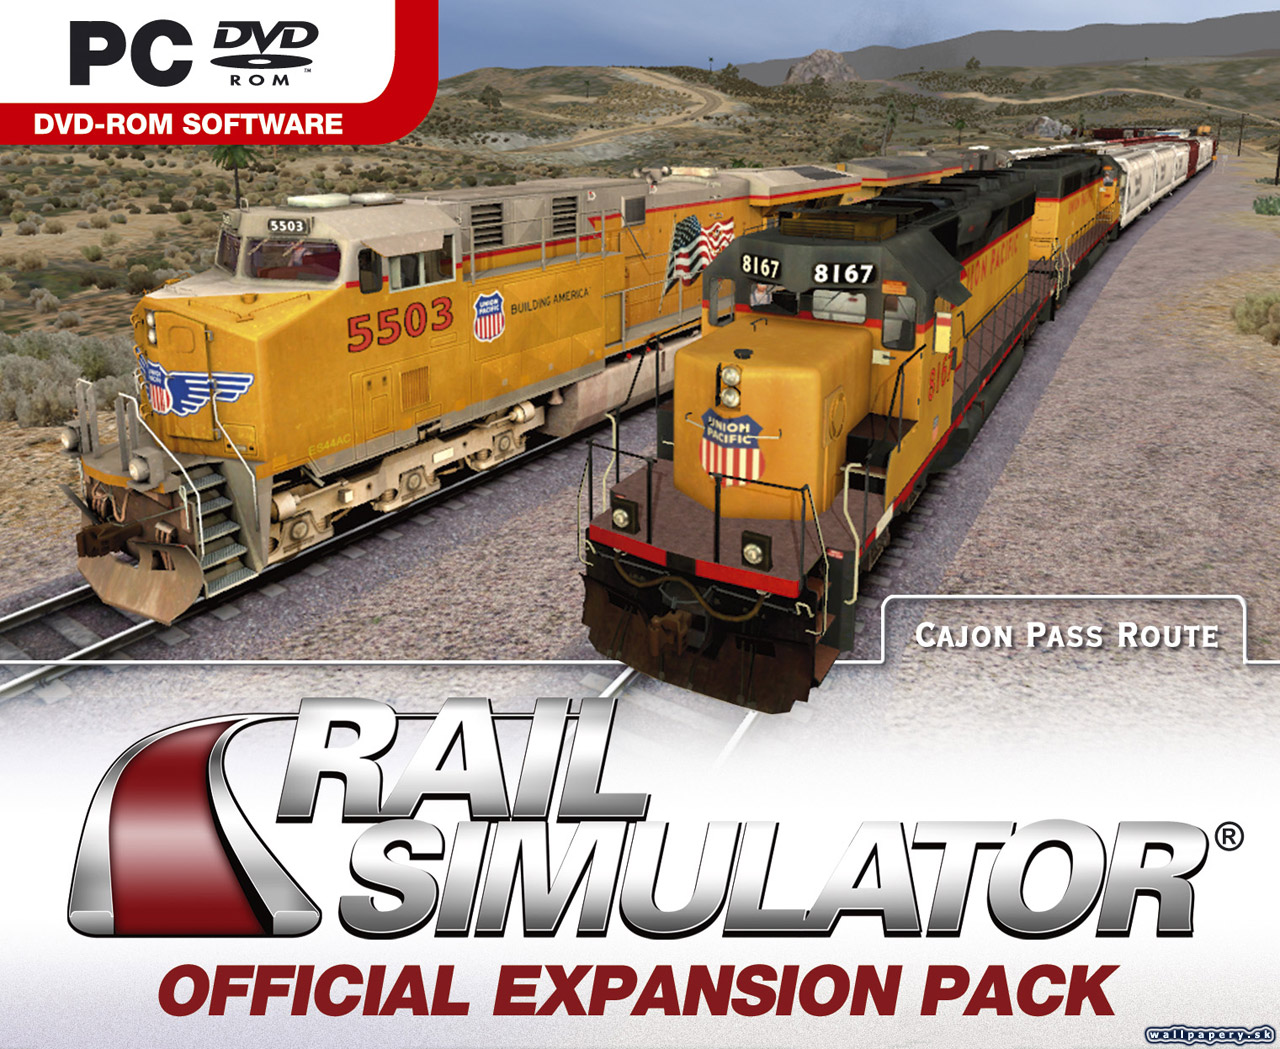 Rail Simulator - Official Expansion Pack - wallpaper 2